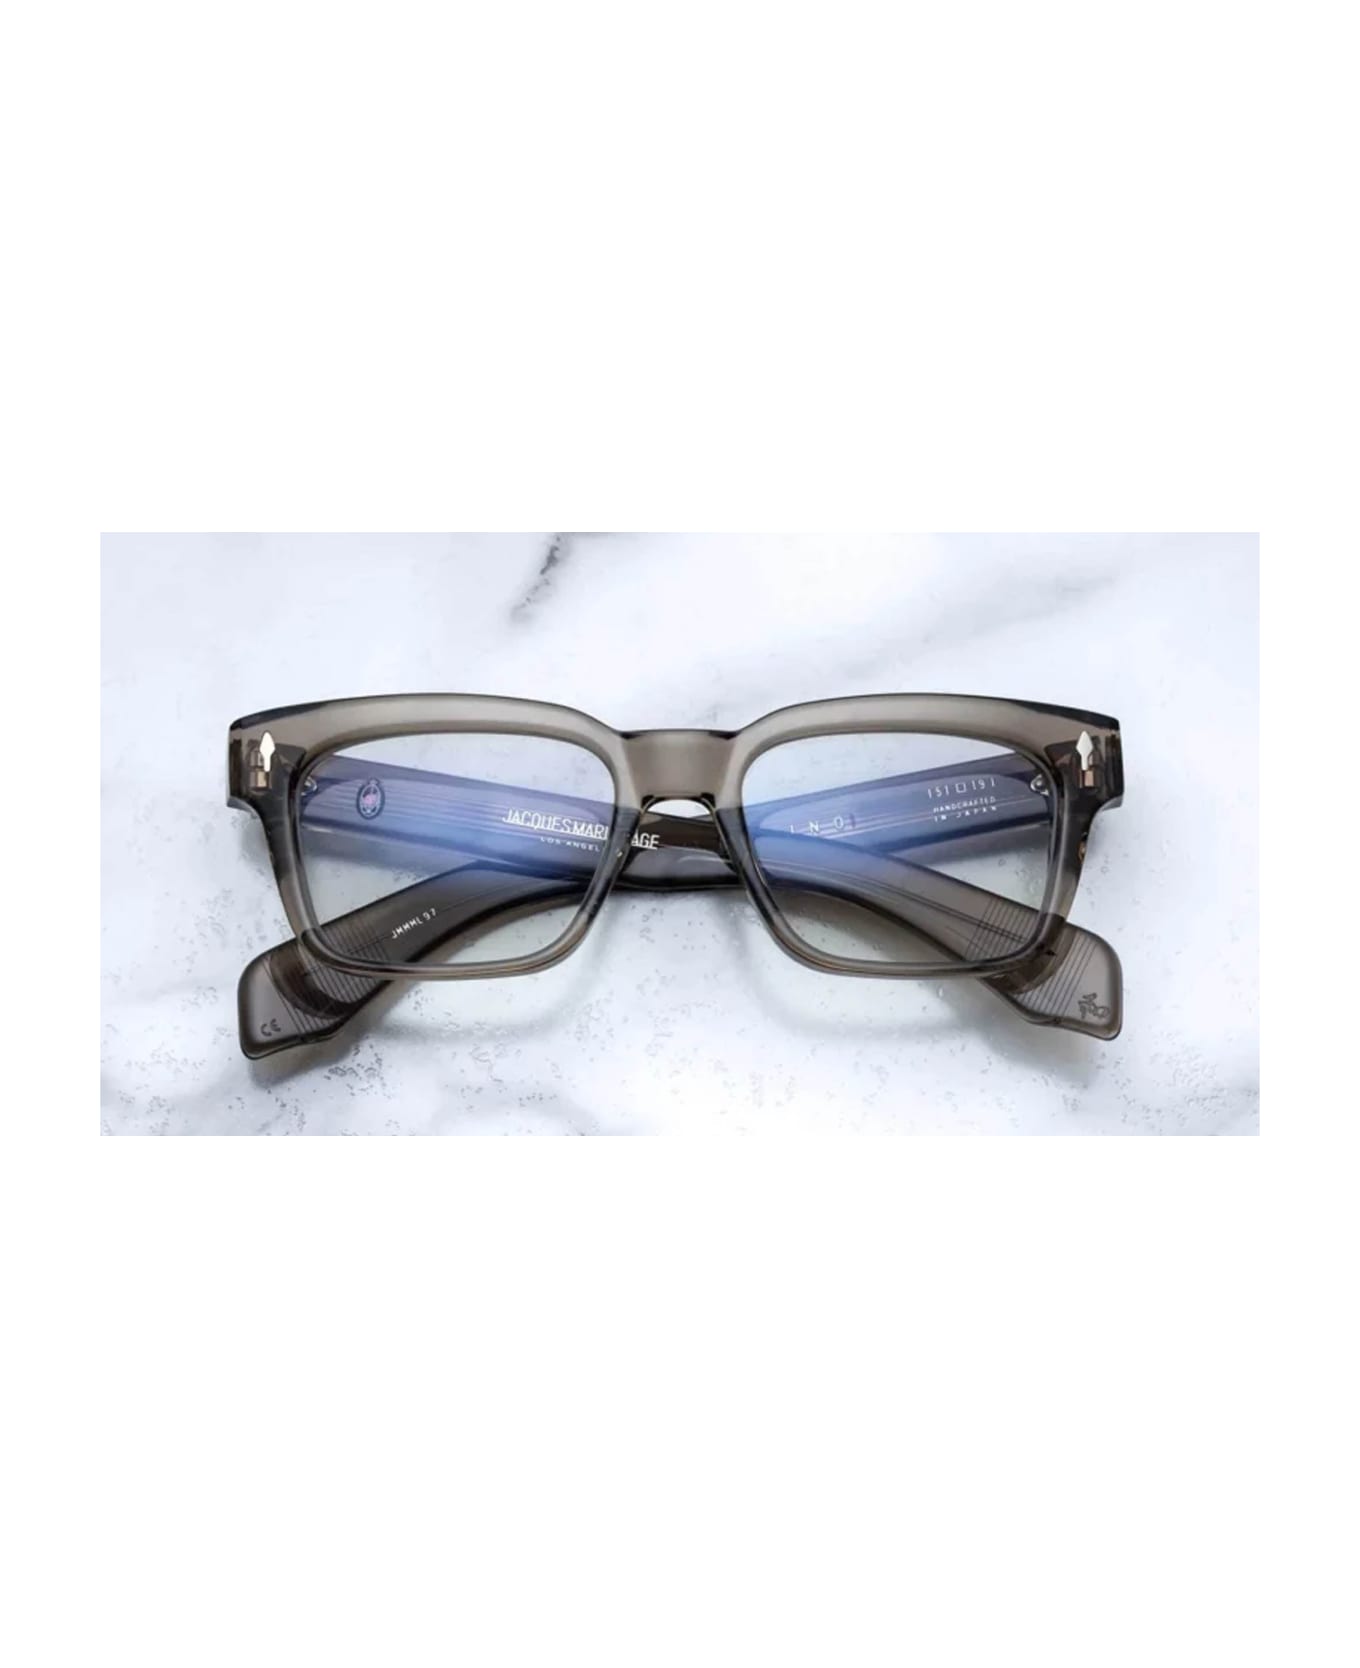 Jacques Marie Mage Molino - Taupe Glasses - taupe